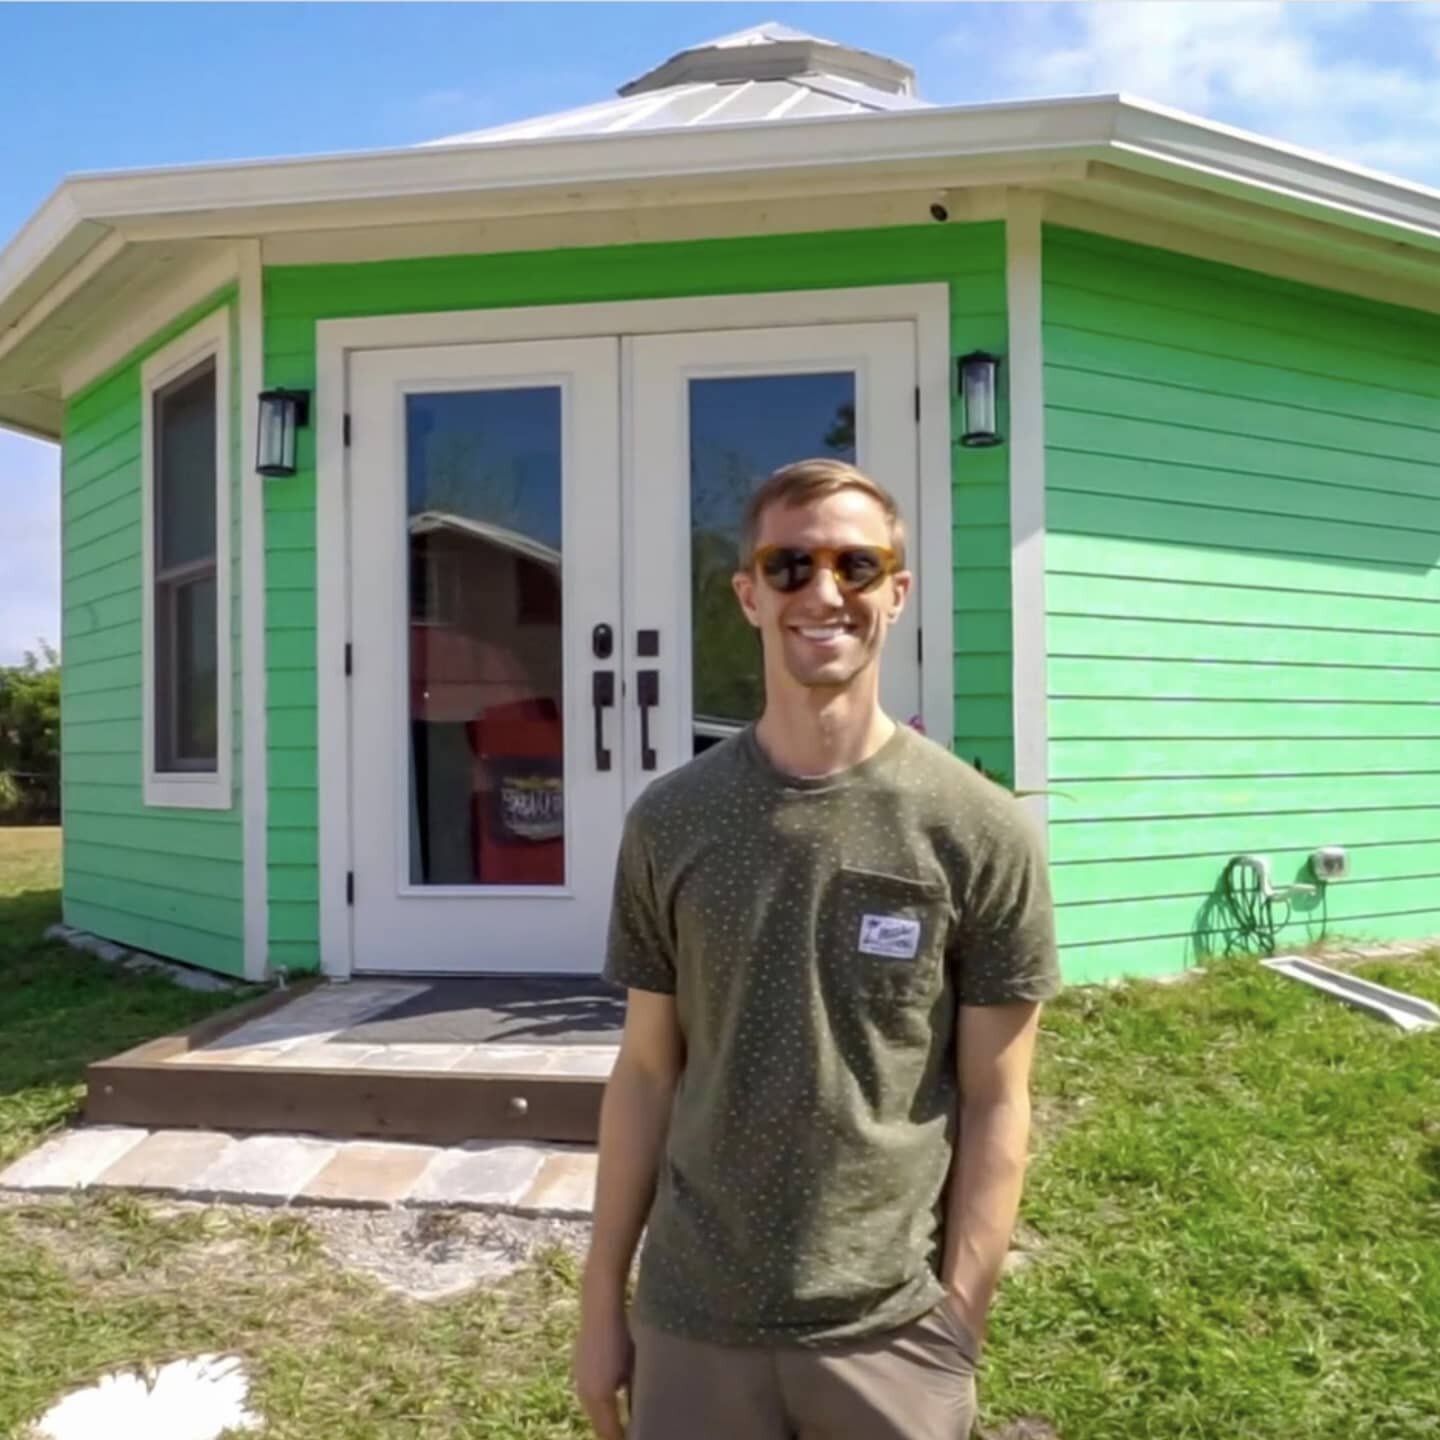 New tour of the island and home by @tinyhousegiantjourney ! Make sure you head to her page to get a glimpse of the island for yourself! 🤙